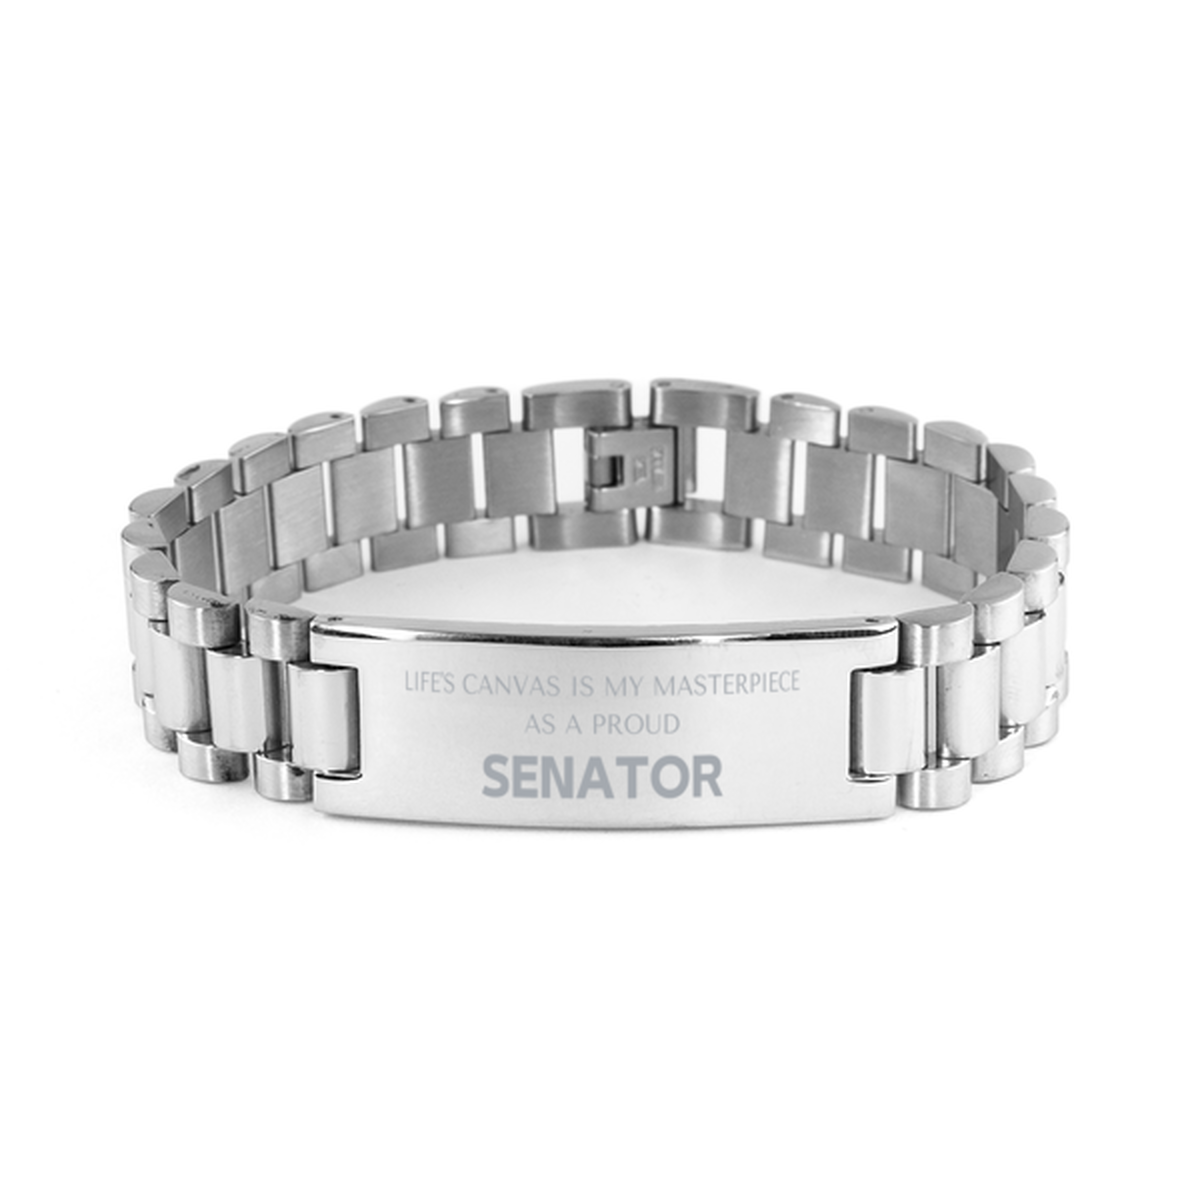 Proud Senator Gifts, Life's canvas is my masterpiece, Epic Birthday Christmas Unique Ladder Stainless Steel Bracelet For Senator, Coworkers, Men, Women, Friends